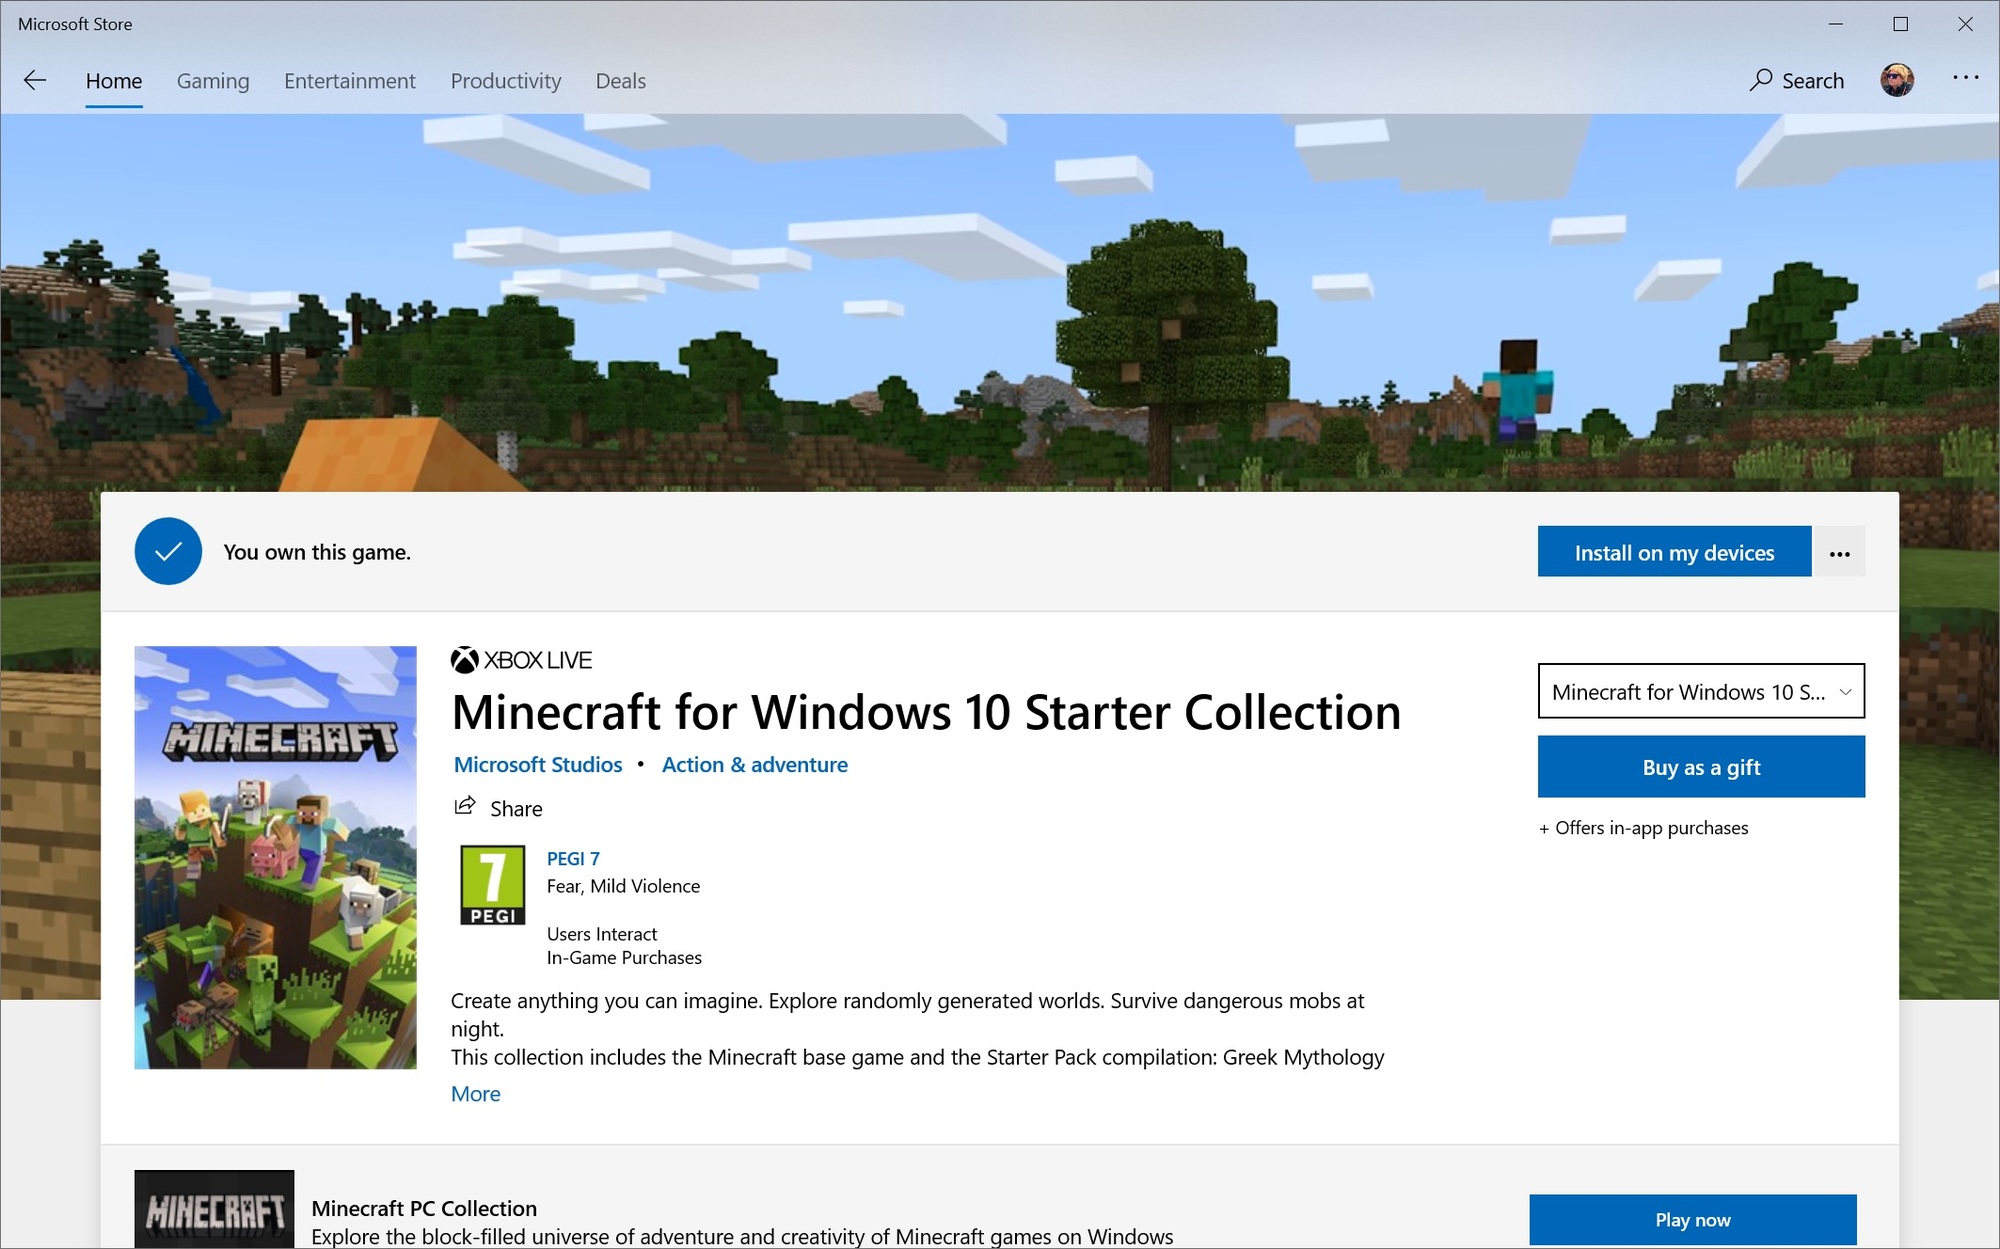 Unable to install Minecraft for Windows 10 starter edition 9274e2e3-8c35-4df9-a6f1-d8662cfc4020?upload=true.jpg